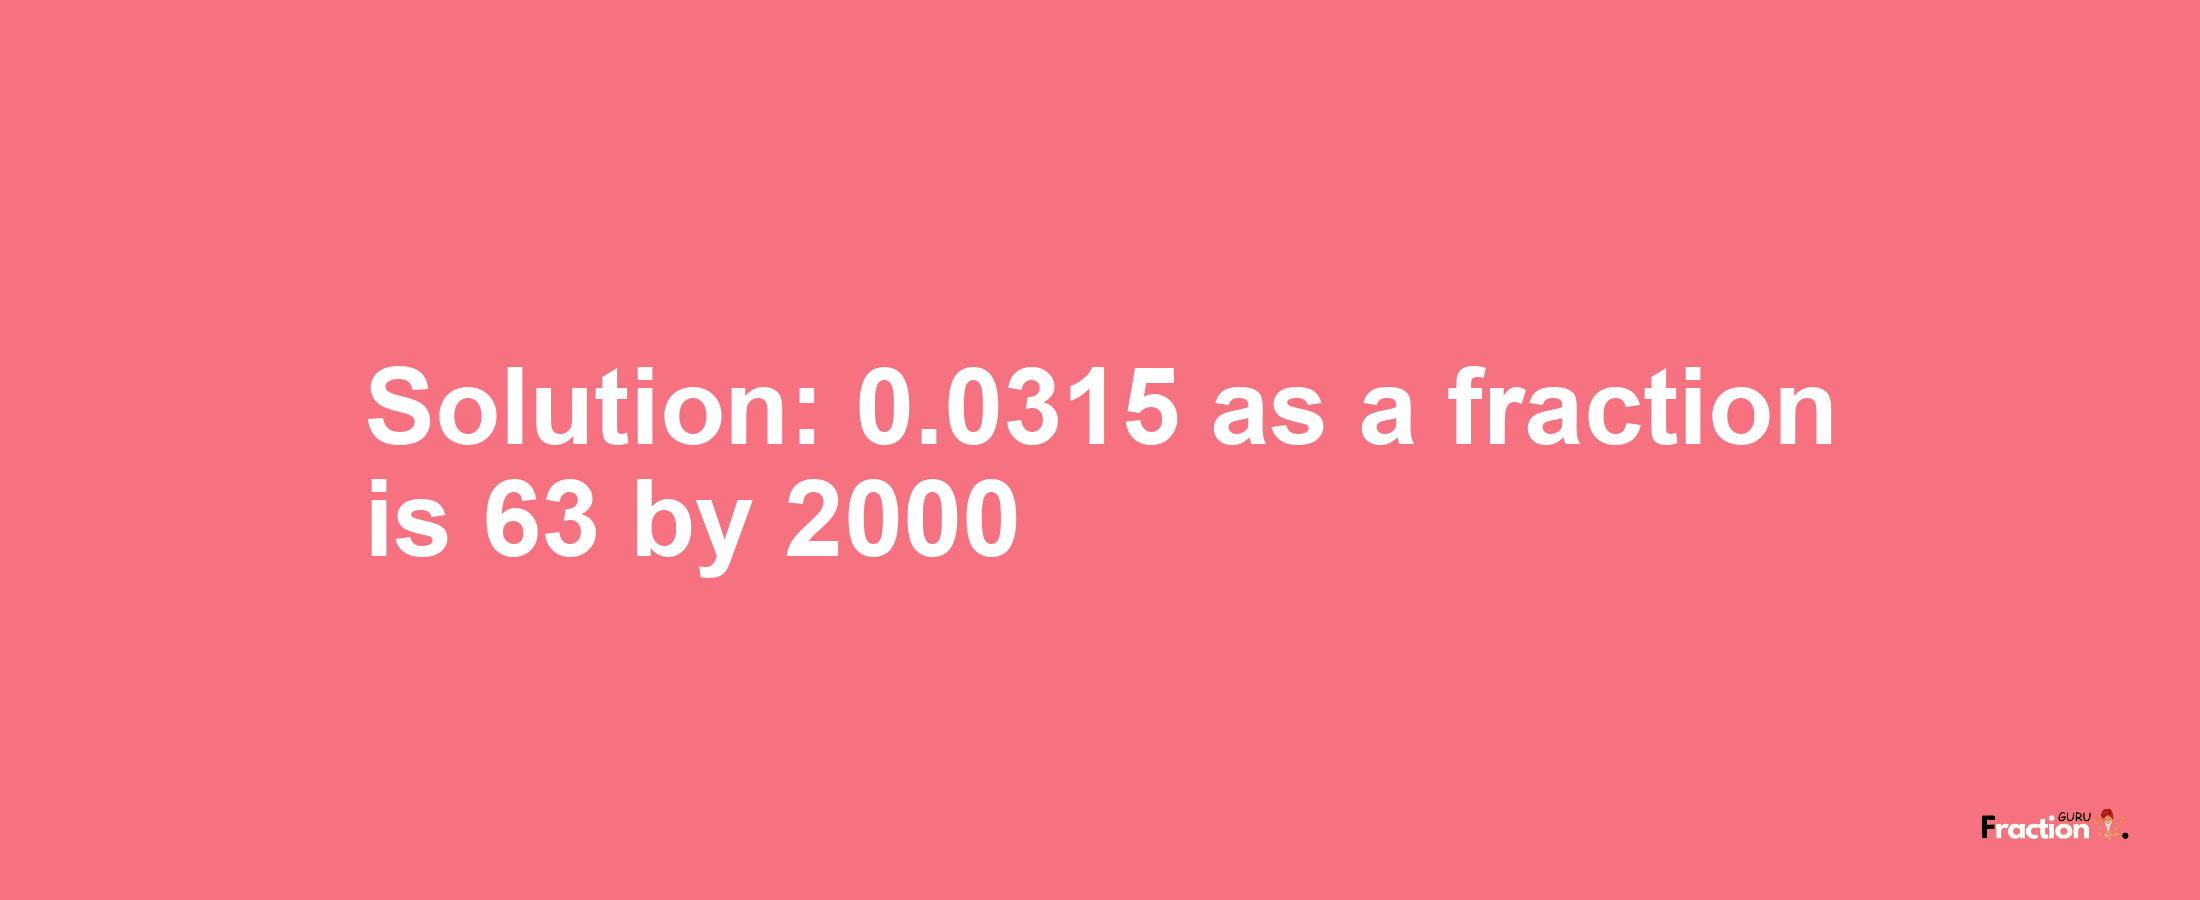 Solution:0.0315 as a fraction is 63/2000